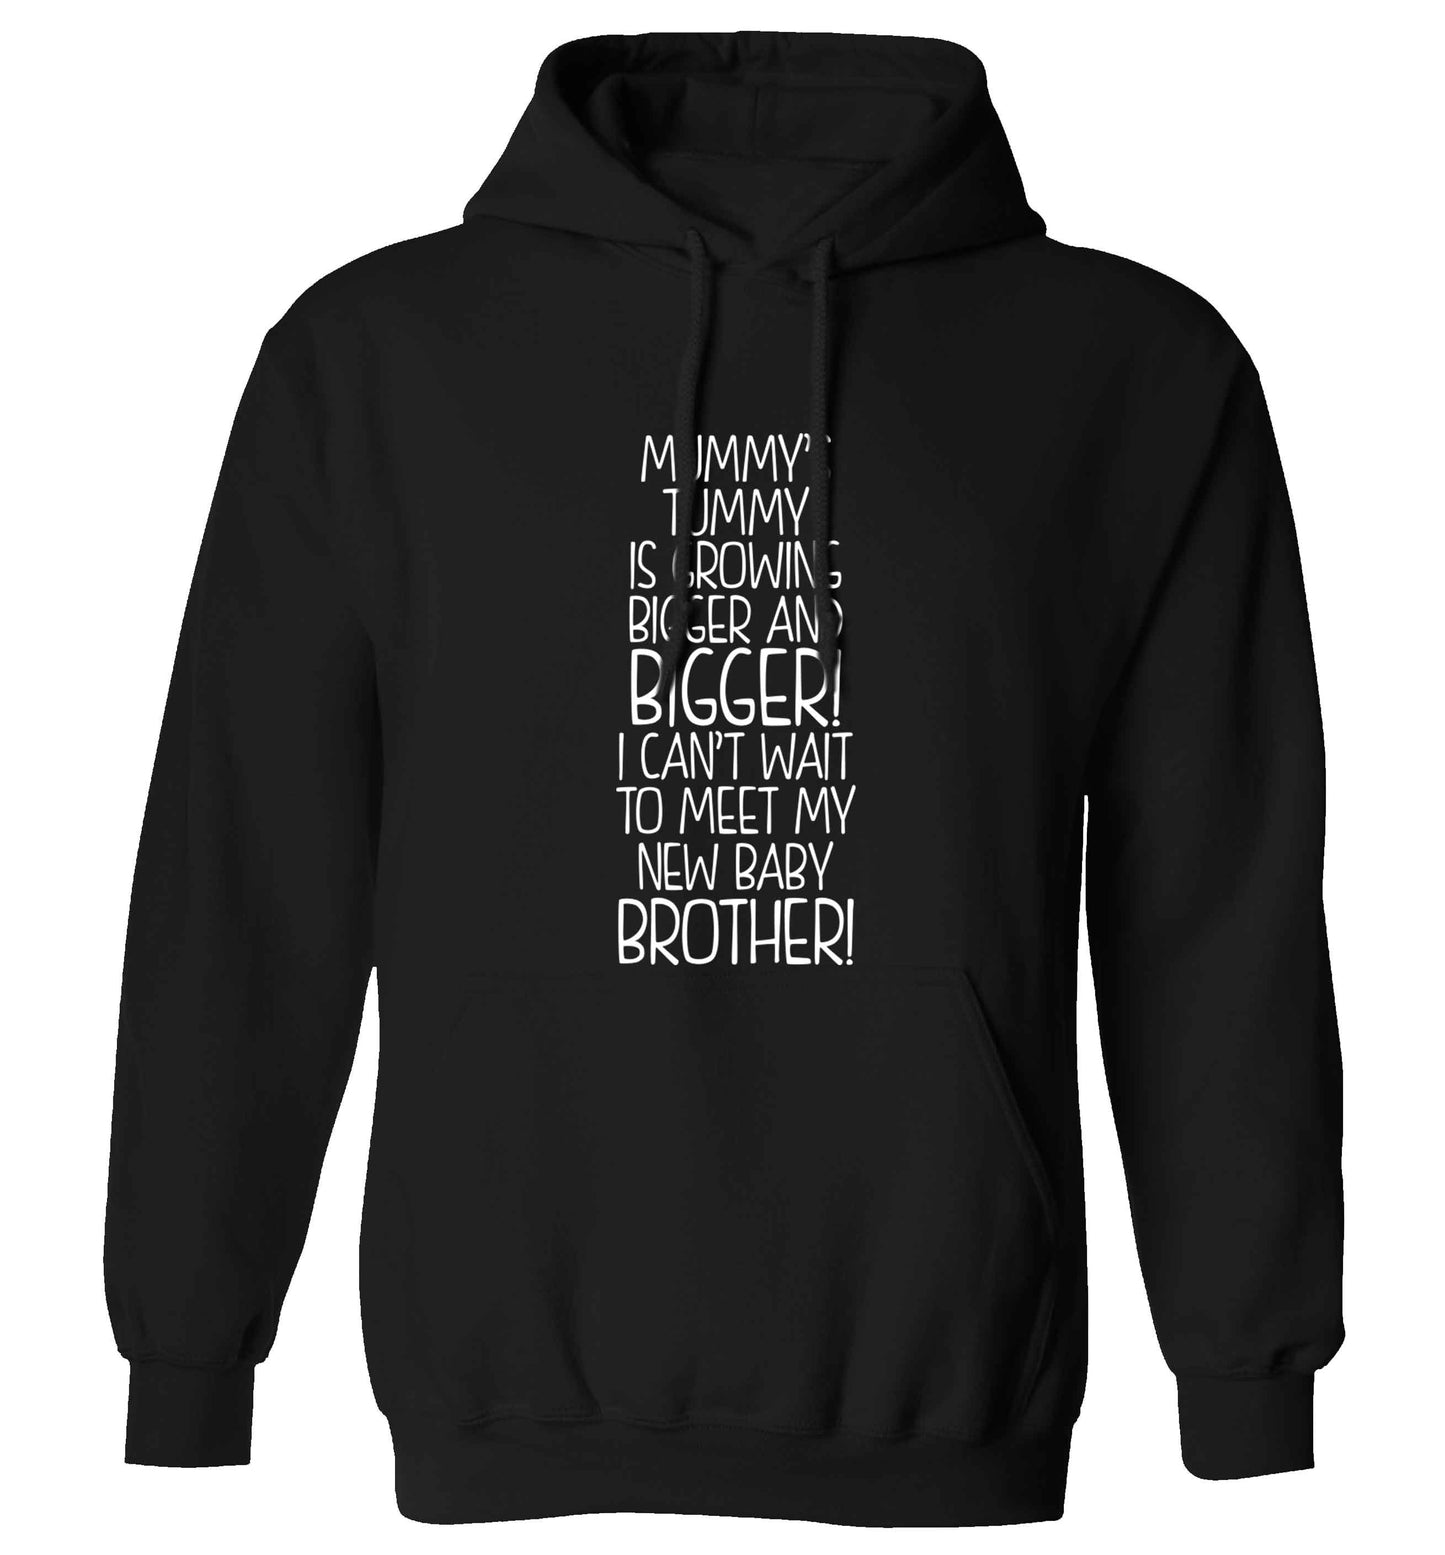 Mummy's tummy is growing bigger and bigger I can't wait to meet my new baby brother! adults unisex black hoodie 2XL